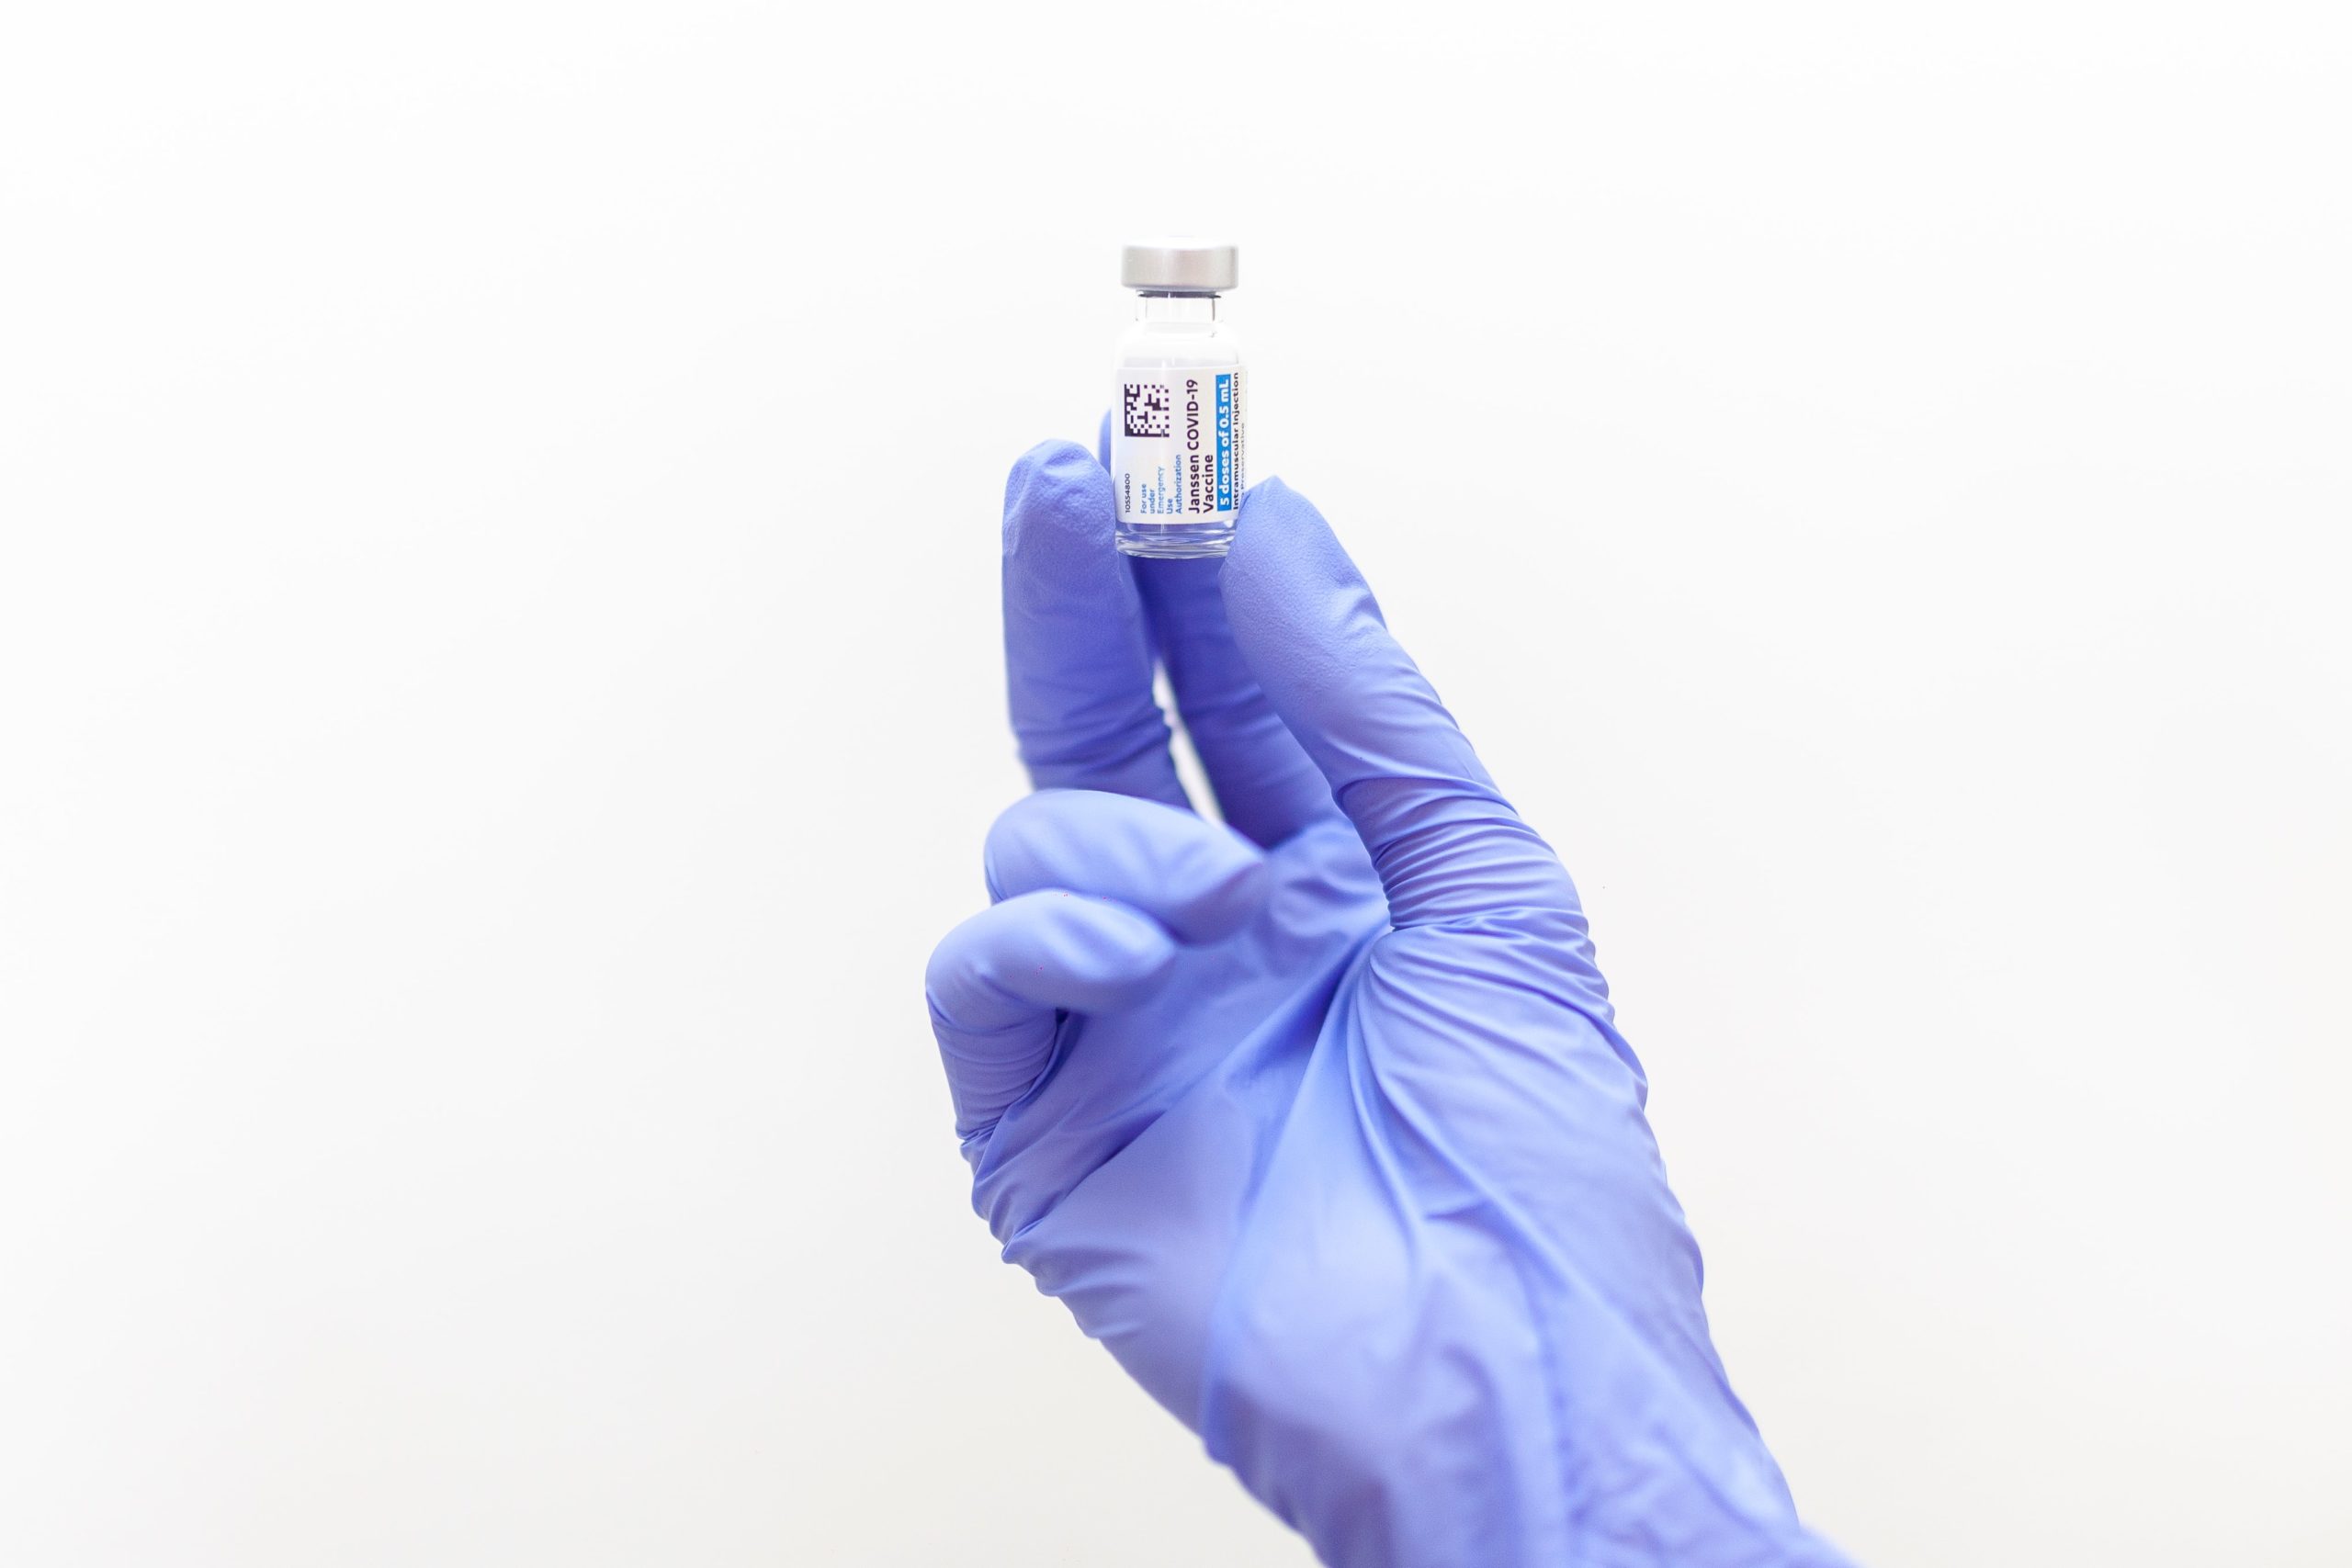 Image of the Covid 19 vaccine